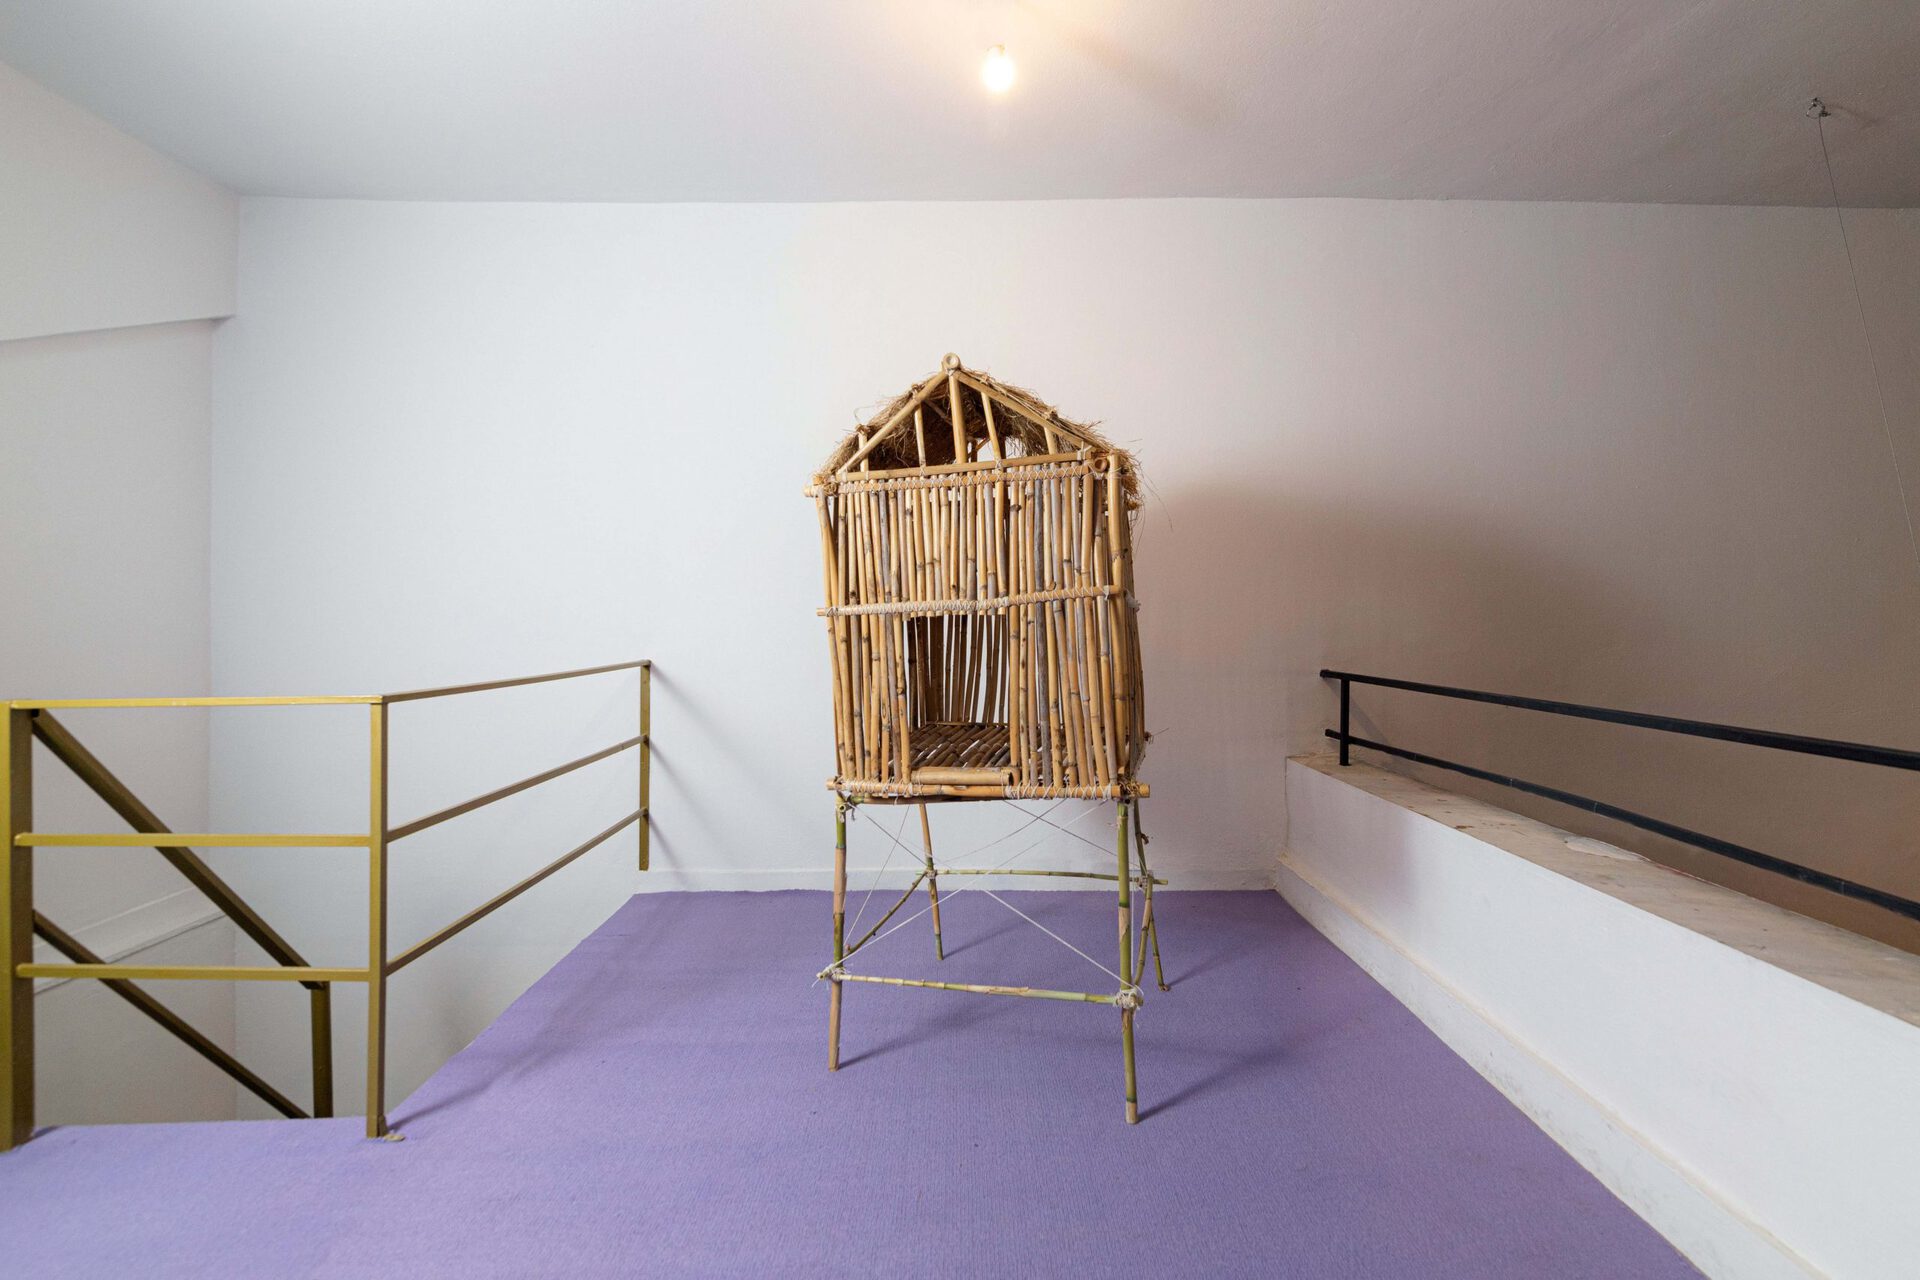 2 Katerina Dania, "I made a room for you in my parents' house", Installation, 67x67x87cm, 2021, photo by Nikos Ziagakis